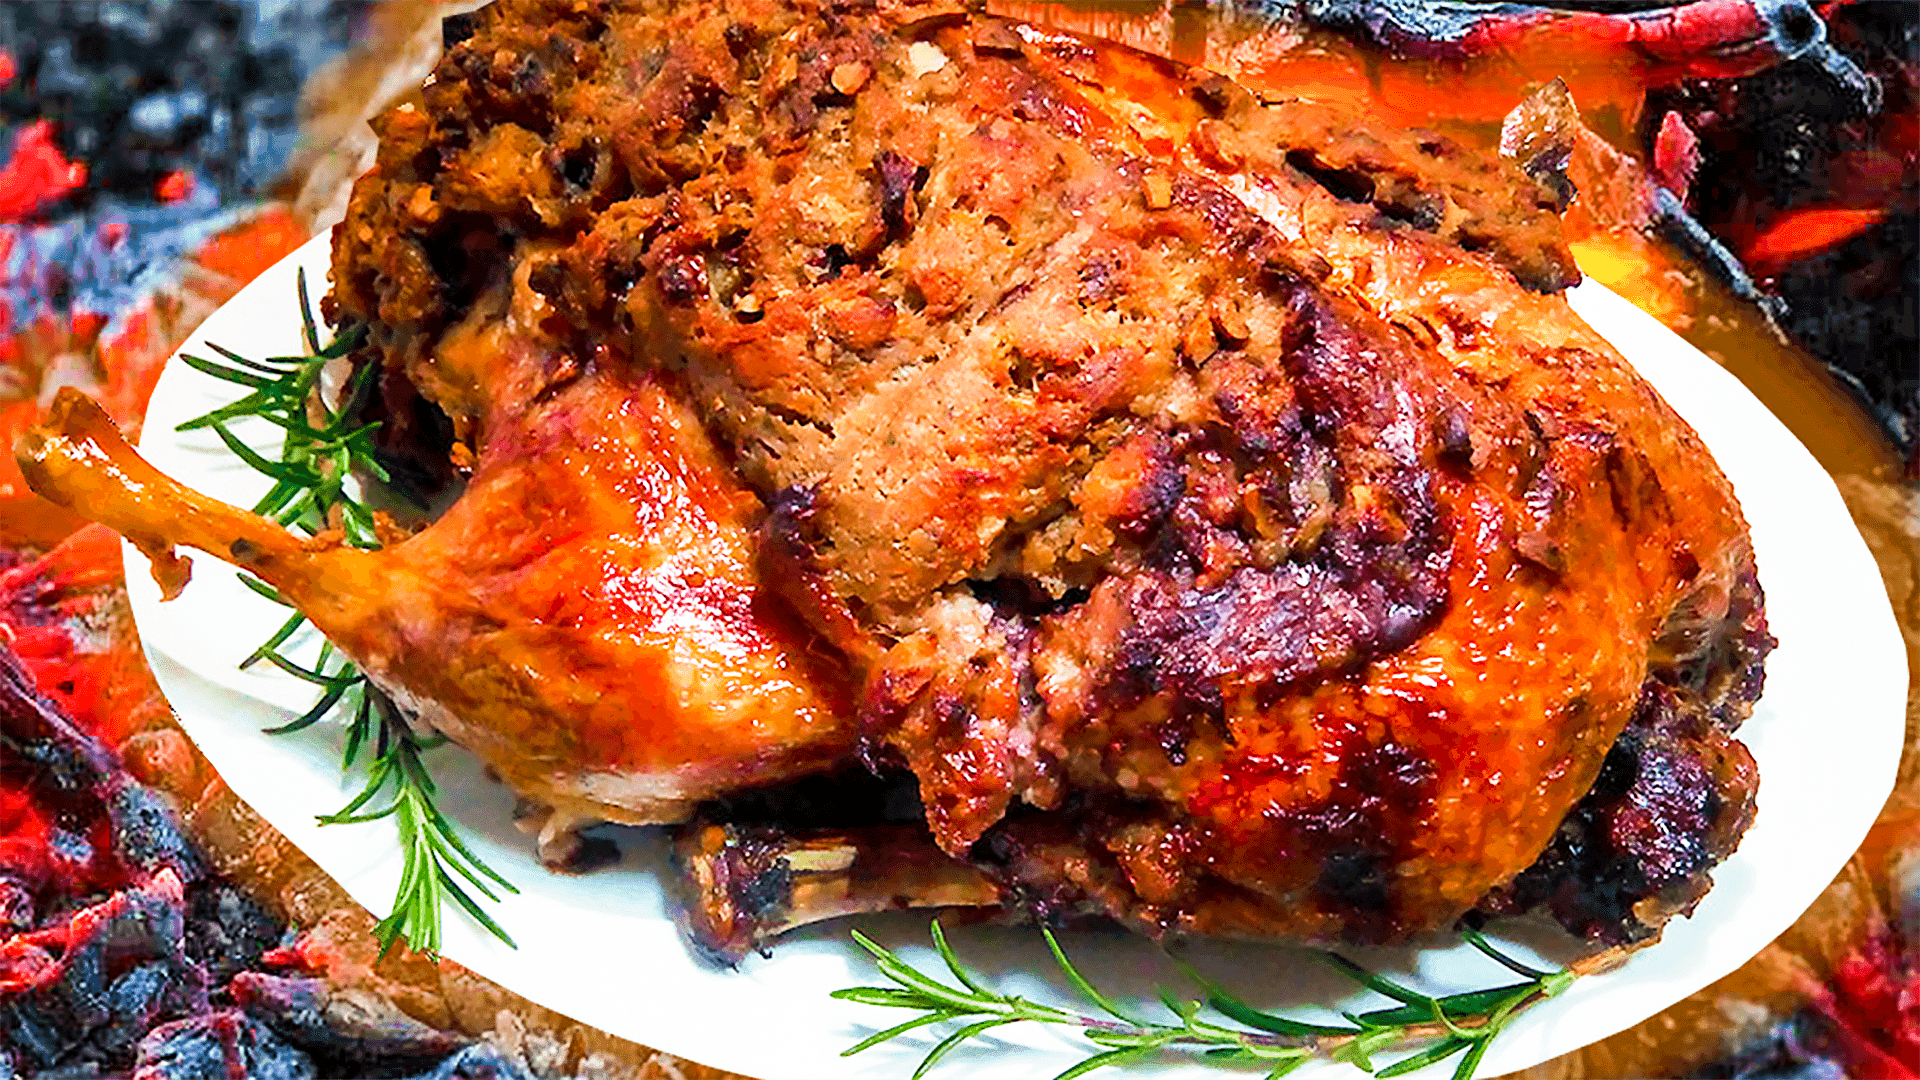 Roasted Stuffed Duck Recipe with Walnut and Apple